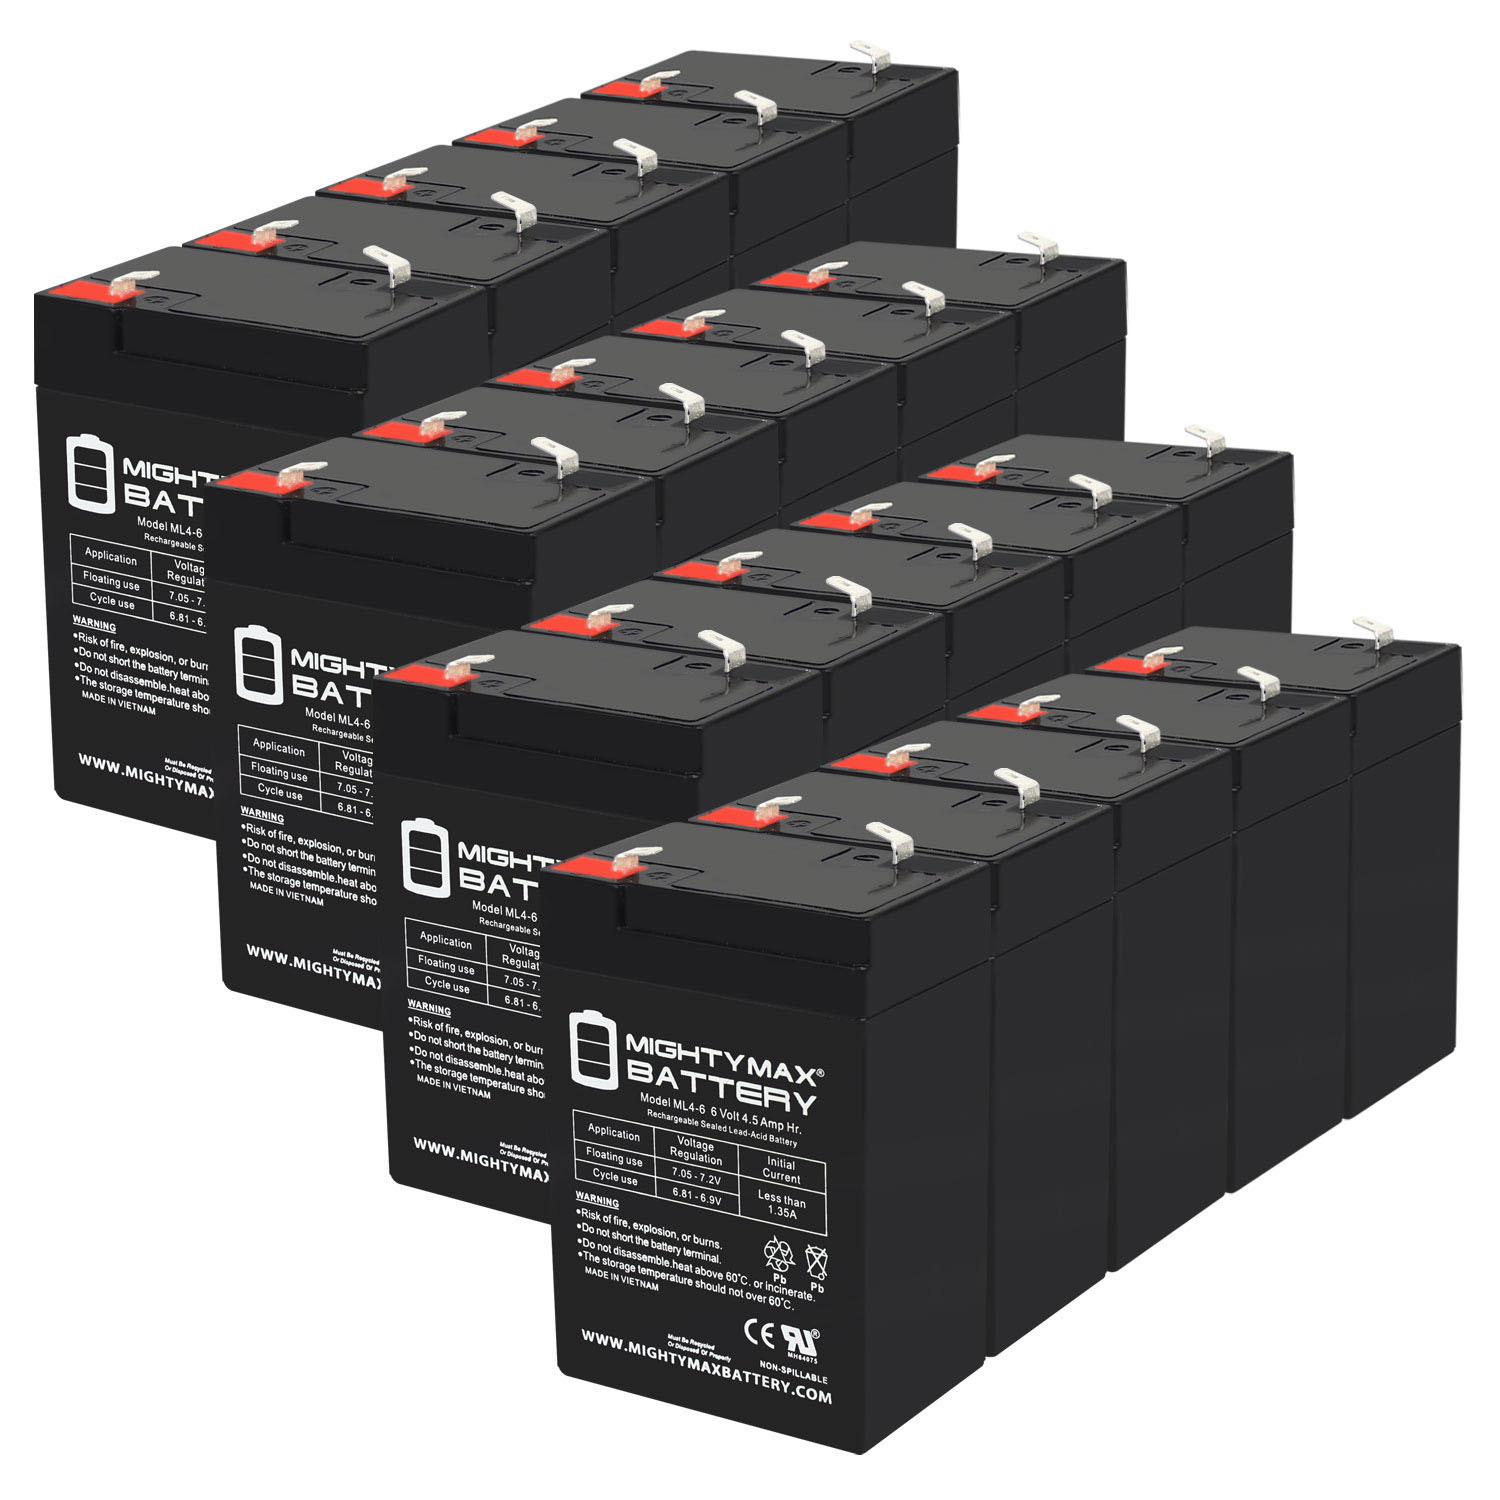 6V 4.5AH SLA Replacement Battery for Dual-Lite AGM HCXURB - 20 Pack